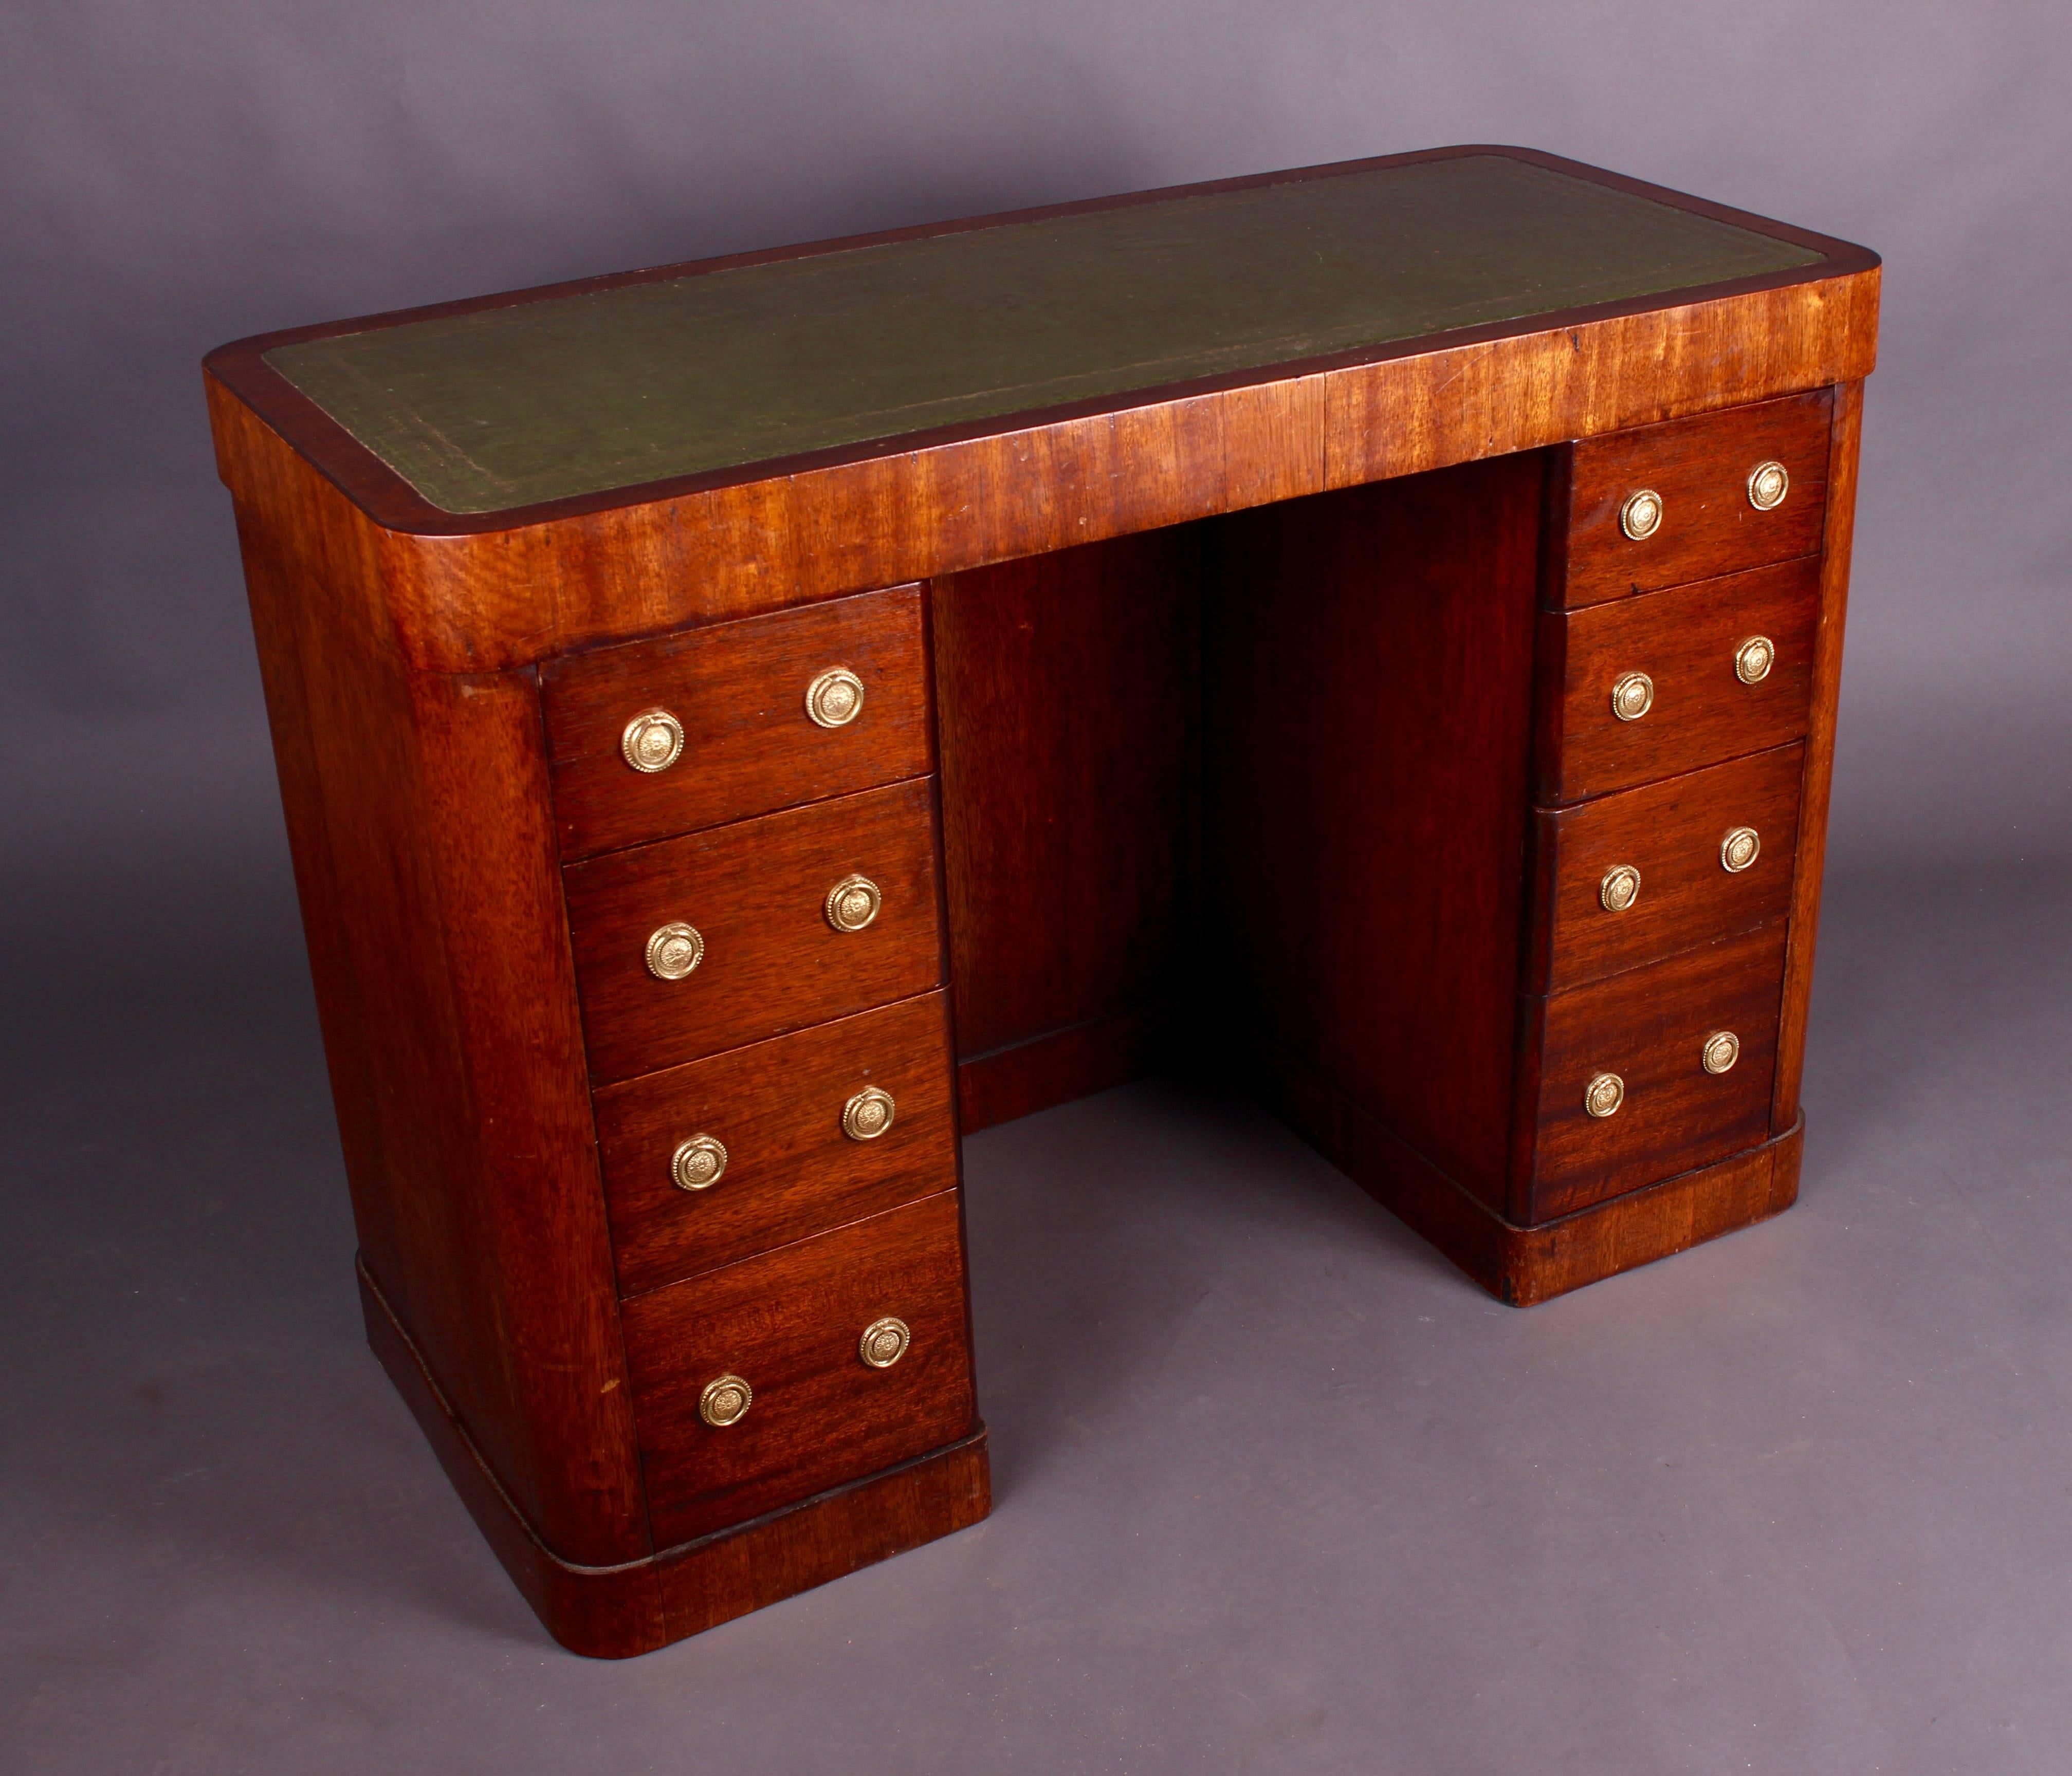 A lovely Art Deco writing desk crafted in oak with an inset tooled green leather inset skiver. Having nicely rounded corners to the desktop with an attractive leather inset. Two banks of four drawers below. The drawers having circular brass ring